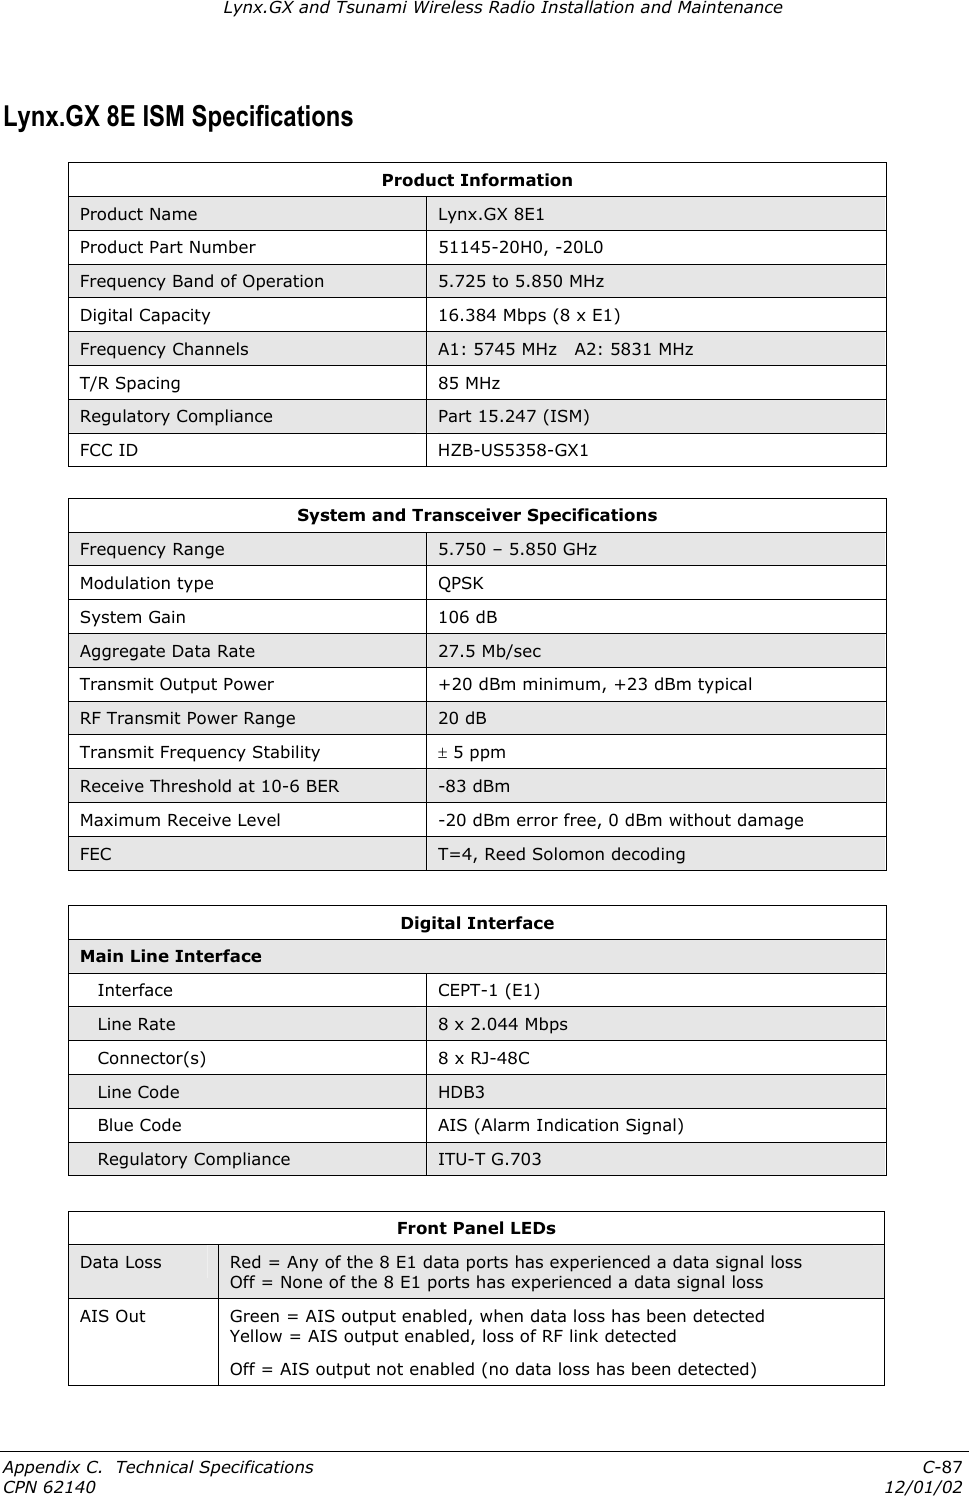 Lynx.GX and Tsunami Wireless Radio Installation and Maintenance Lynx.GX 8E ISM Specifications Product Information Product Name  Lynx.GX 8E1  Product Part Number  51145-20H0, -20L0 Frequency Band of Operation  5.725 to 5.850 MHz Digital Capacity  16.384 Mbps (8 x E1) Frequency Channels  A1: 5745 MHz   A2: 5831 MHz T/R Spacing  85 MHz Regulatory Compliance  Part 15.247 (ISM) FCC ID  HZB-US5358-GX1  System and Transceiver Specifications Frequency Range  5.750 – 5.850 GHz Modulation type  QPSK System Gain  106 dB Aggregate Data Rate  27.5 Mb/sec Transmit Output Power  +20 dBm minimum, +23 dBm typical RF Transmit Power Range  20 dB Transmit Frequency Stability  ± 5 ppm  Receive Threshold at 10-6 BER  -83 dBm Maximum Receive Level  -20 dBm error free, 0 dBm without damage FEC  T=4, Reed Solomon decoding  Digital Interface Main Line Interface    Interface  CEPT-1 (E1)    Line Rate  8 x 2.044 Mbps     Connector(s)  8 x RJ-48C    Line Code  HDB3    Blue Code  AIS (Alarm Indication Signal)    Regulatory Compliance  ITU-T G.703  Front Panel LEDs Data Loss  Red = Any of the 8 E1 data ports has experienced a data signal loss Off = None of the 8 E1 ports has experienced a data signal loss AIS Out  Green = AIS output enabled, when data loss has been detected Yellow = AIS output enabled, loss of RF link detected Off = AIS output not enabled (no data loss has been detected) Appendix C.  Technical Specifications  C-87 CPN 62140  12/01/02 